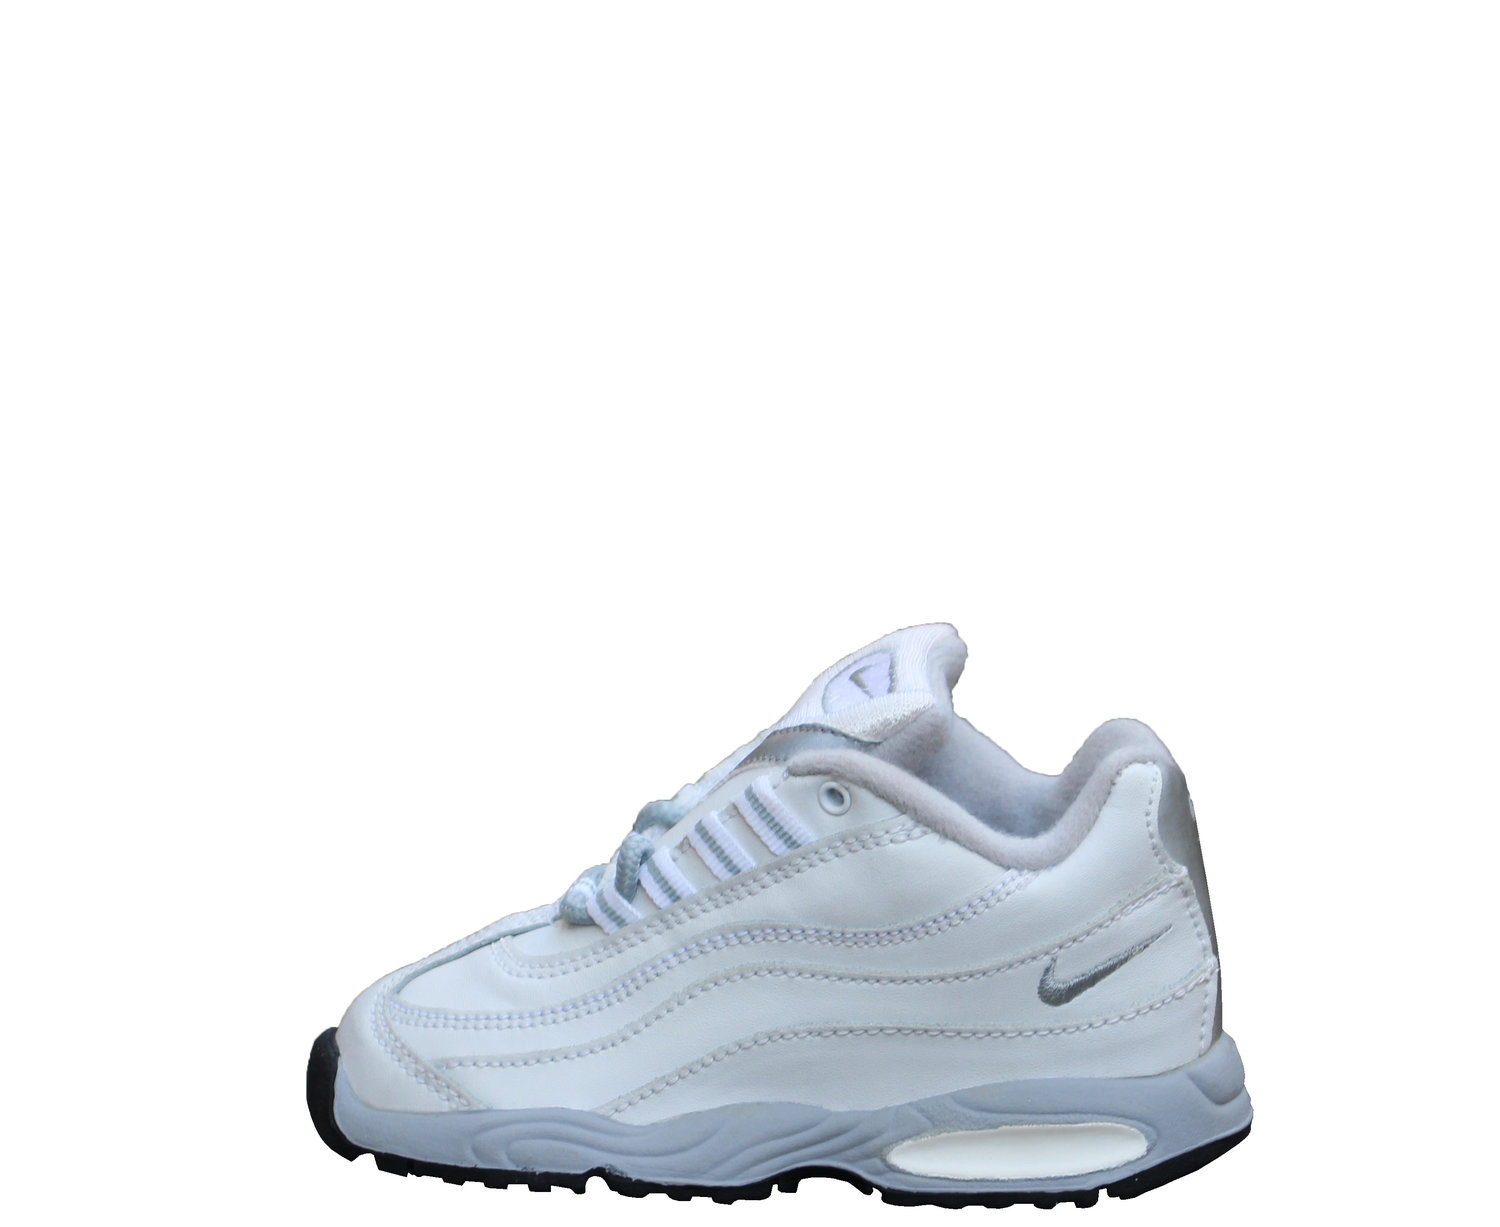 Baby Nike Air Max 95 White / Silver (Size 7.5c, 8.5c) DS Roots